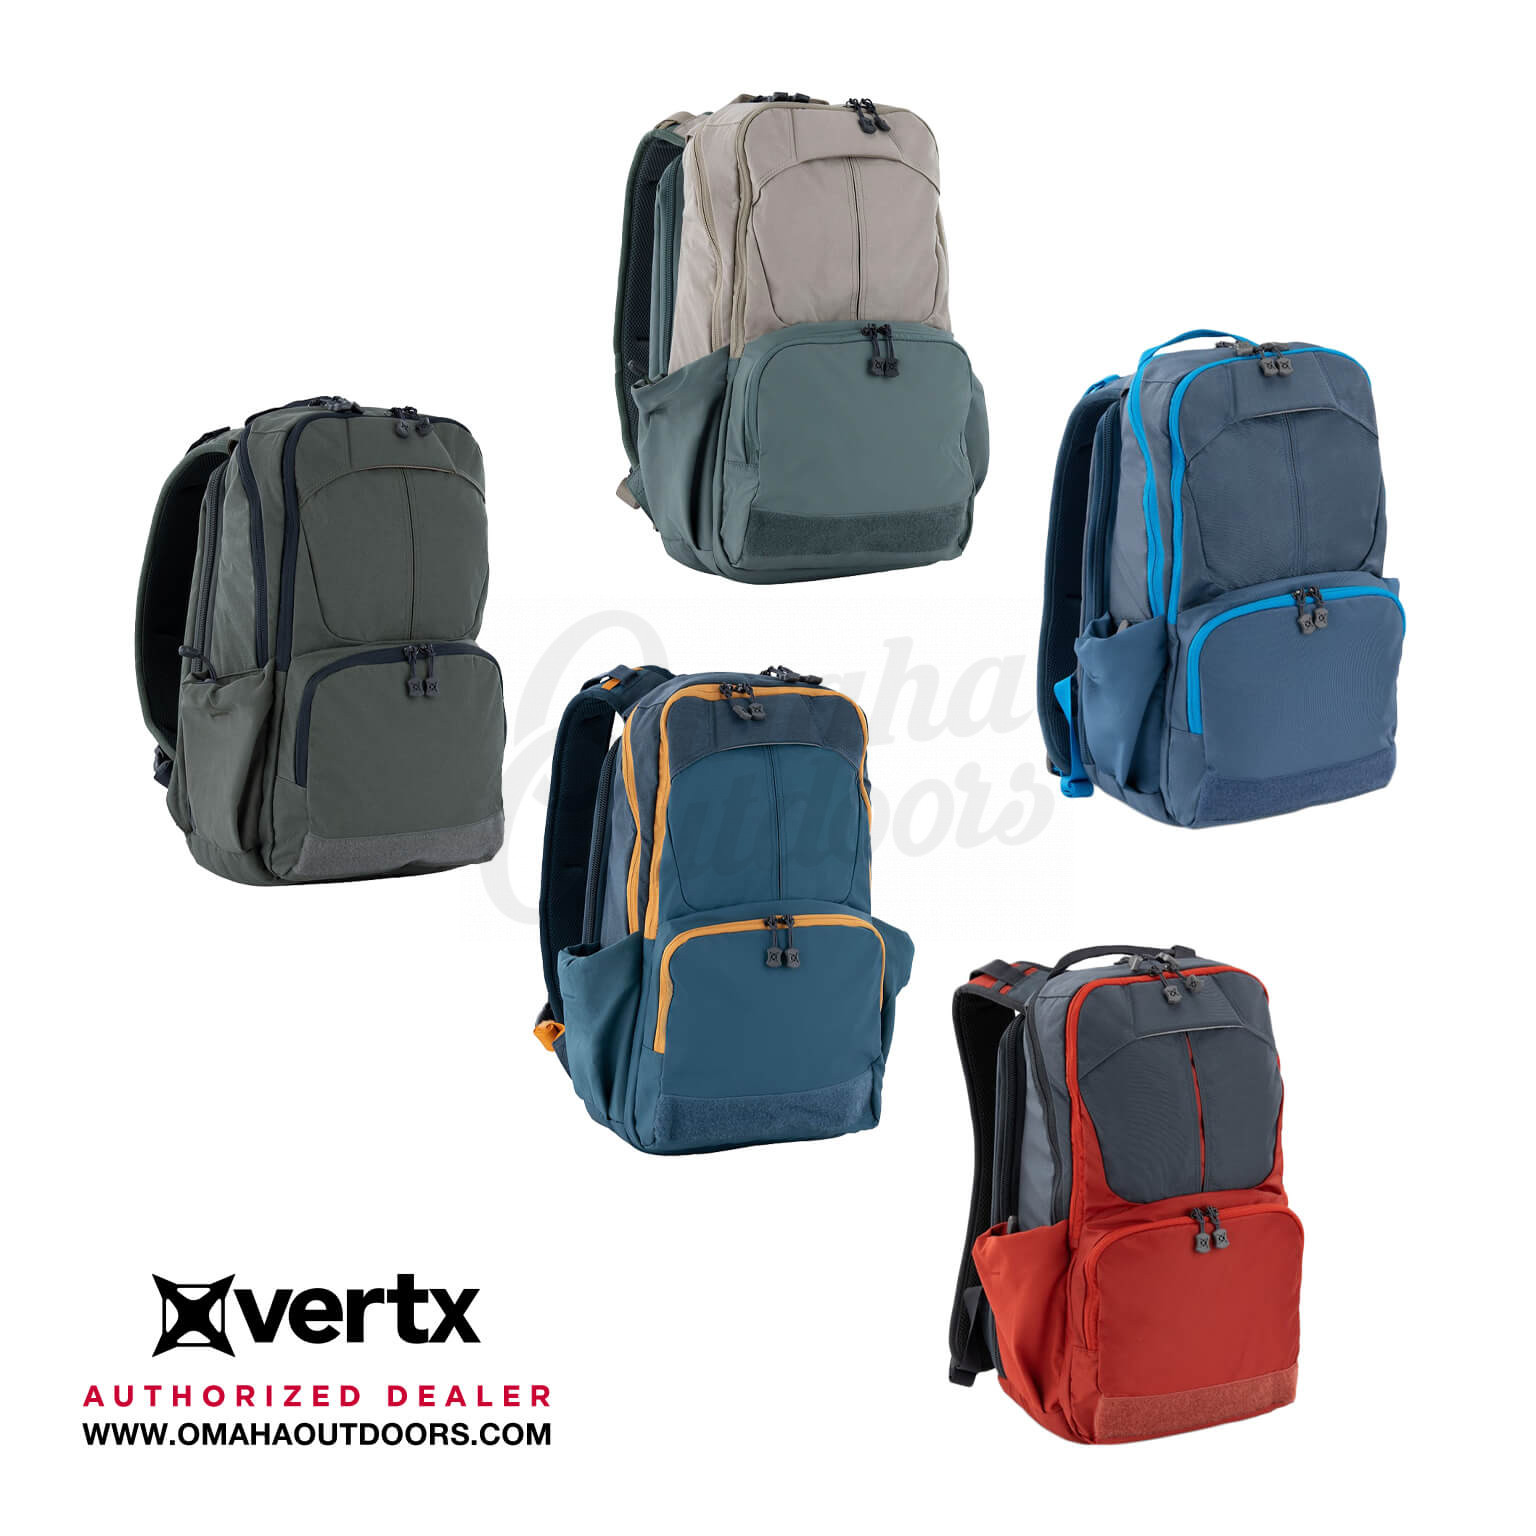 Vertx Ready Pack 2.0 Backpack - Free Shipping